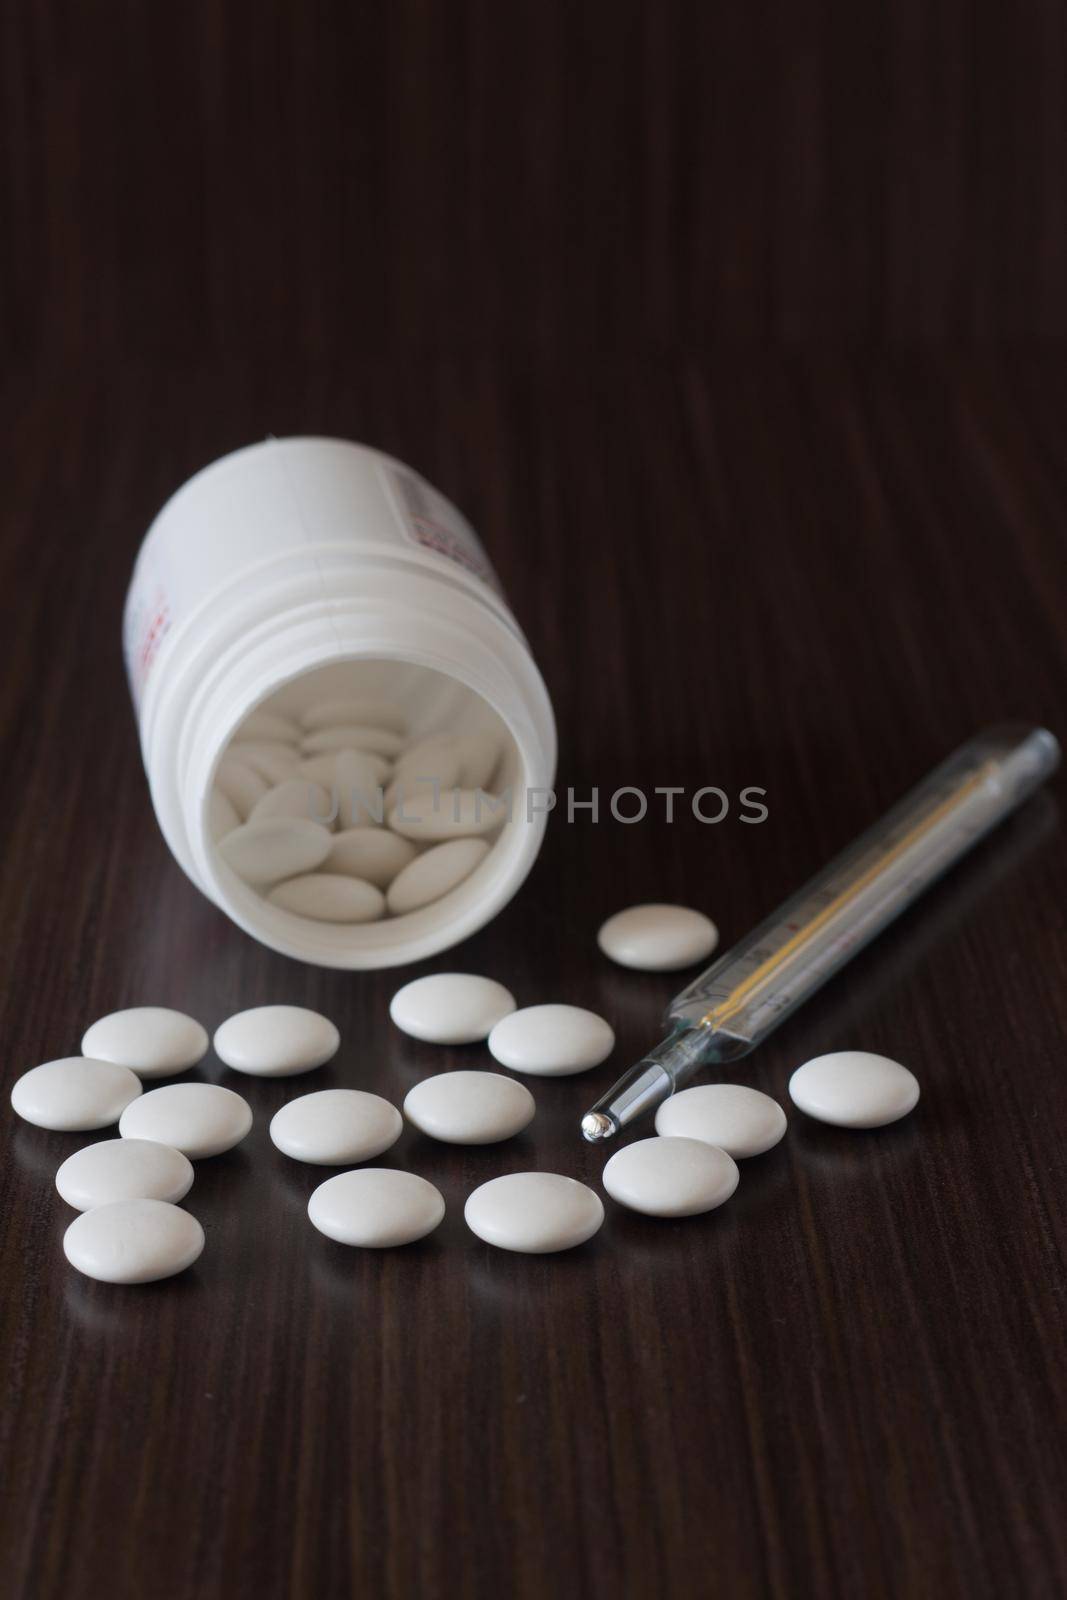 Pills from a jar and body temperature thermometer on a dark background by marketlan